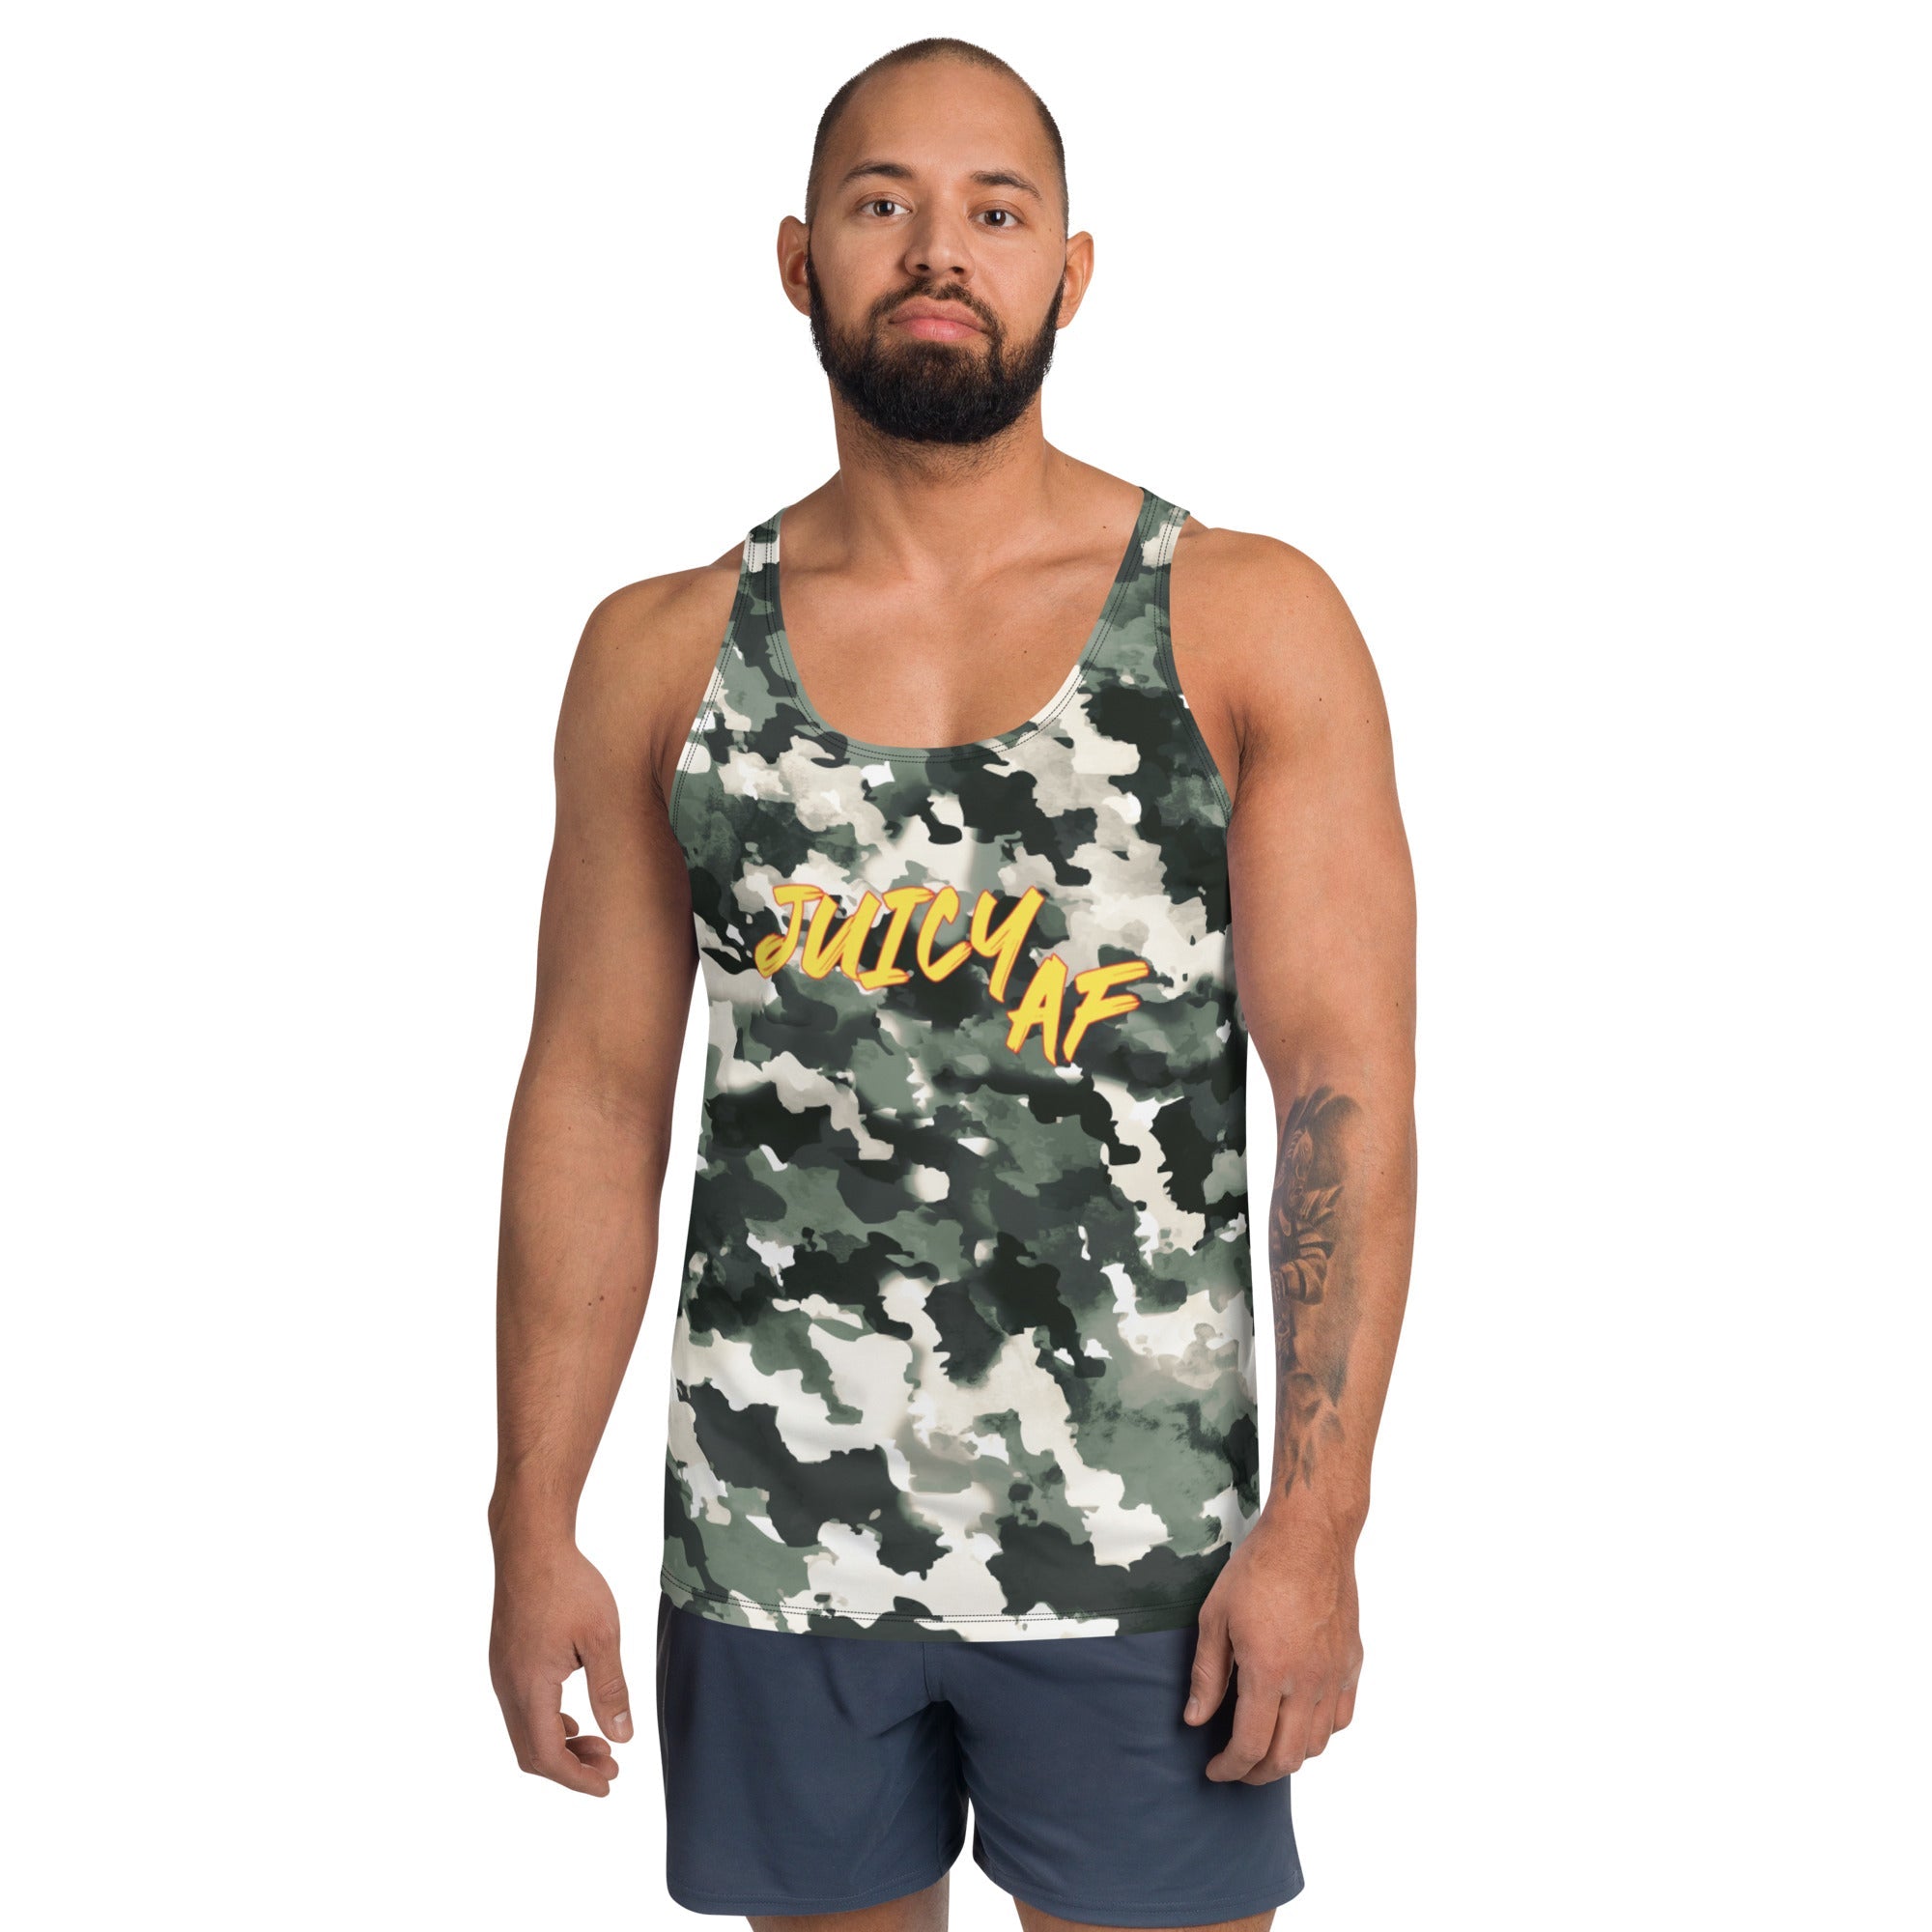 CAMO Juicy AF Tank - Krazy Muscle Nutrition Krazy Muscle Nutrition3019995_9049